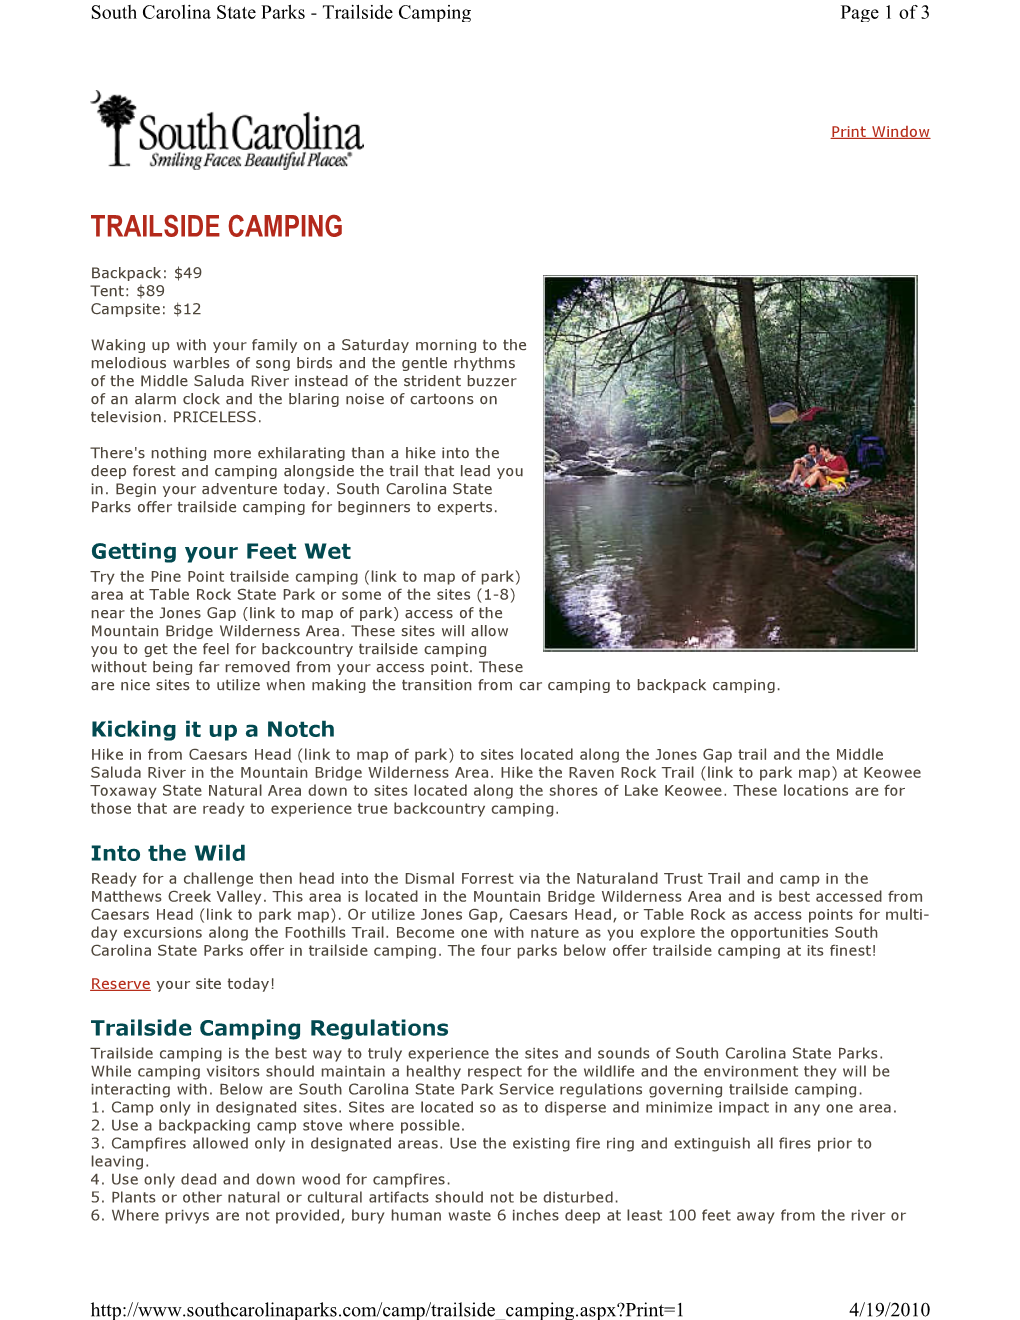 Trailside Camping Page 1 of 3